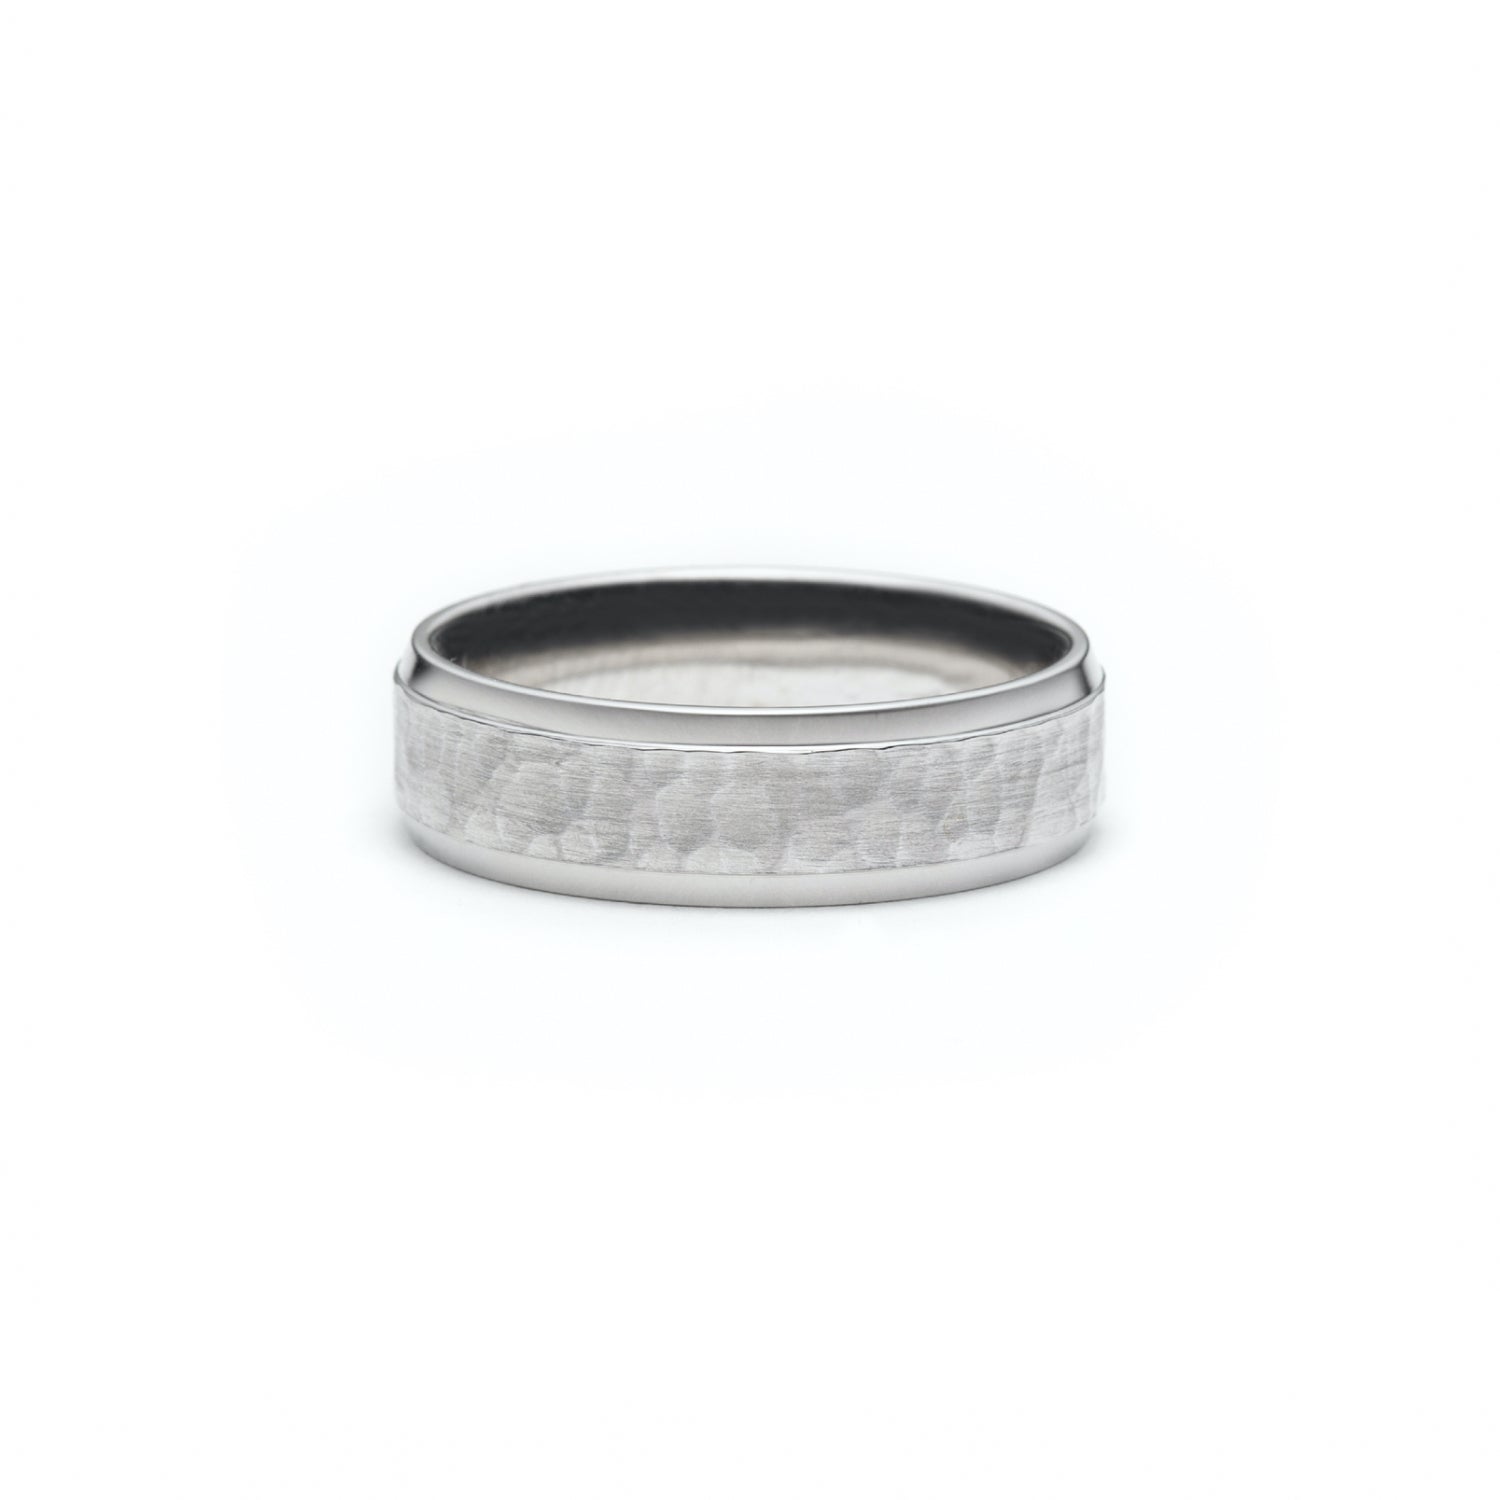 Hammered Finish Bevelled Edge 6-7 mm Wedding Band in White Gold